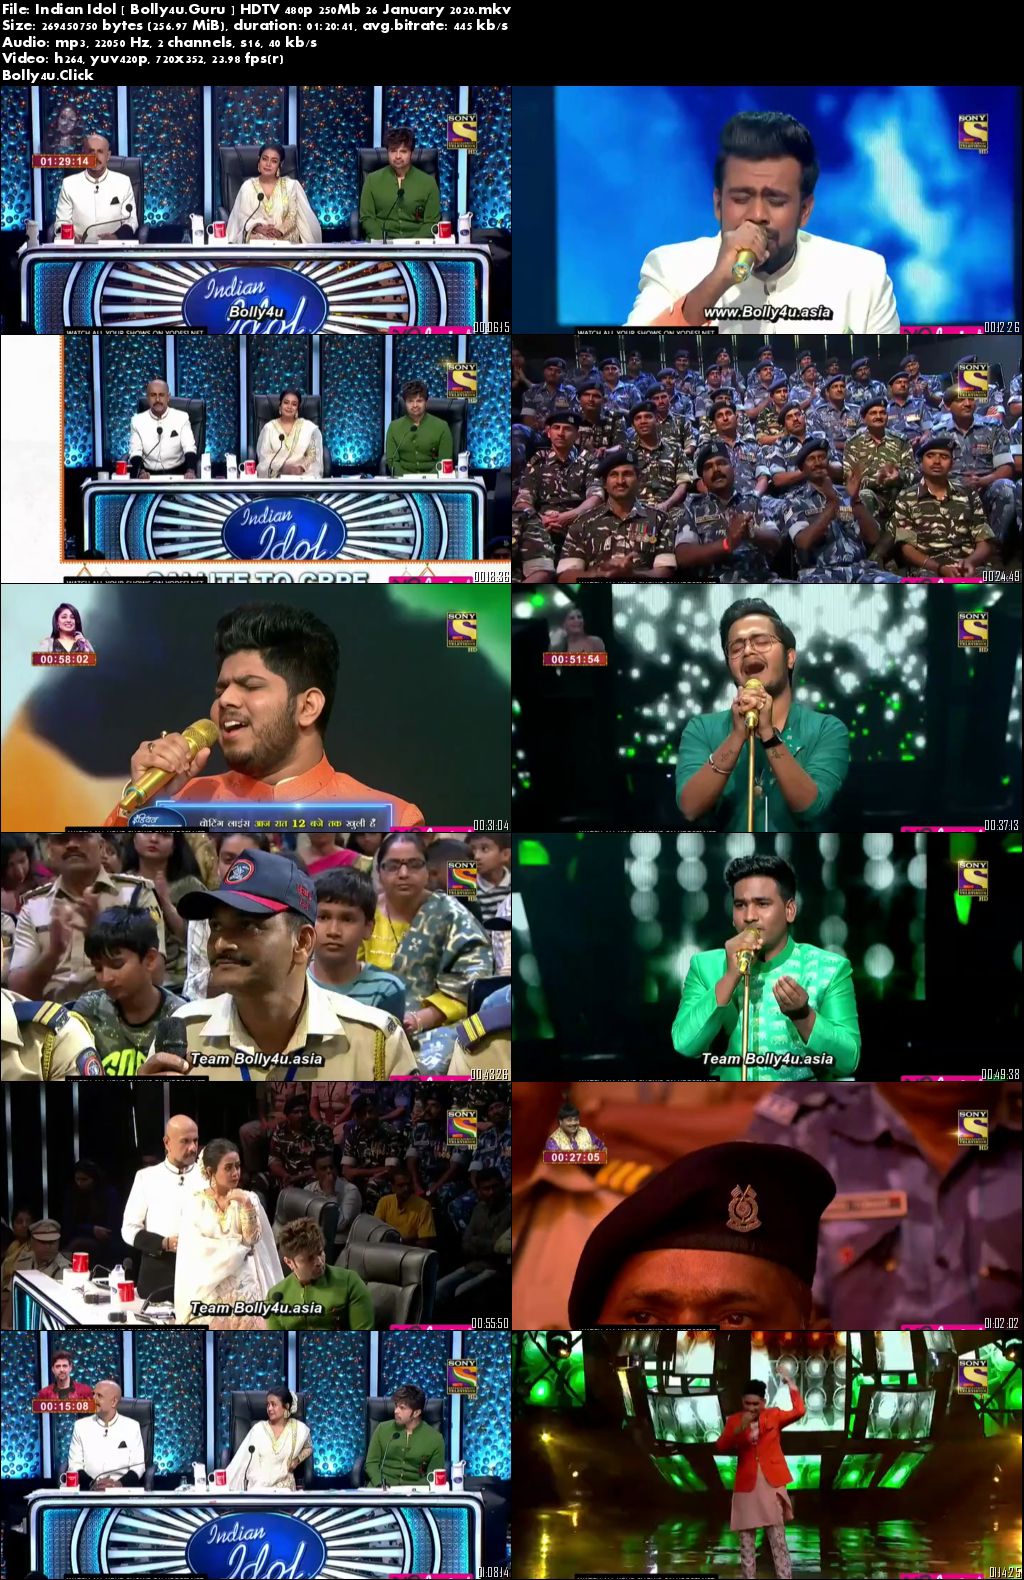 Indian Idol 2019 HDTV 480p 250Mb 26 January 2020 Download